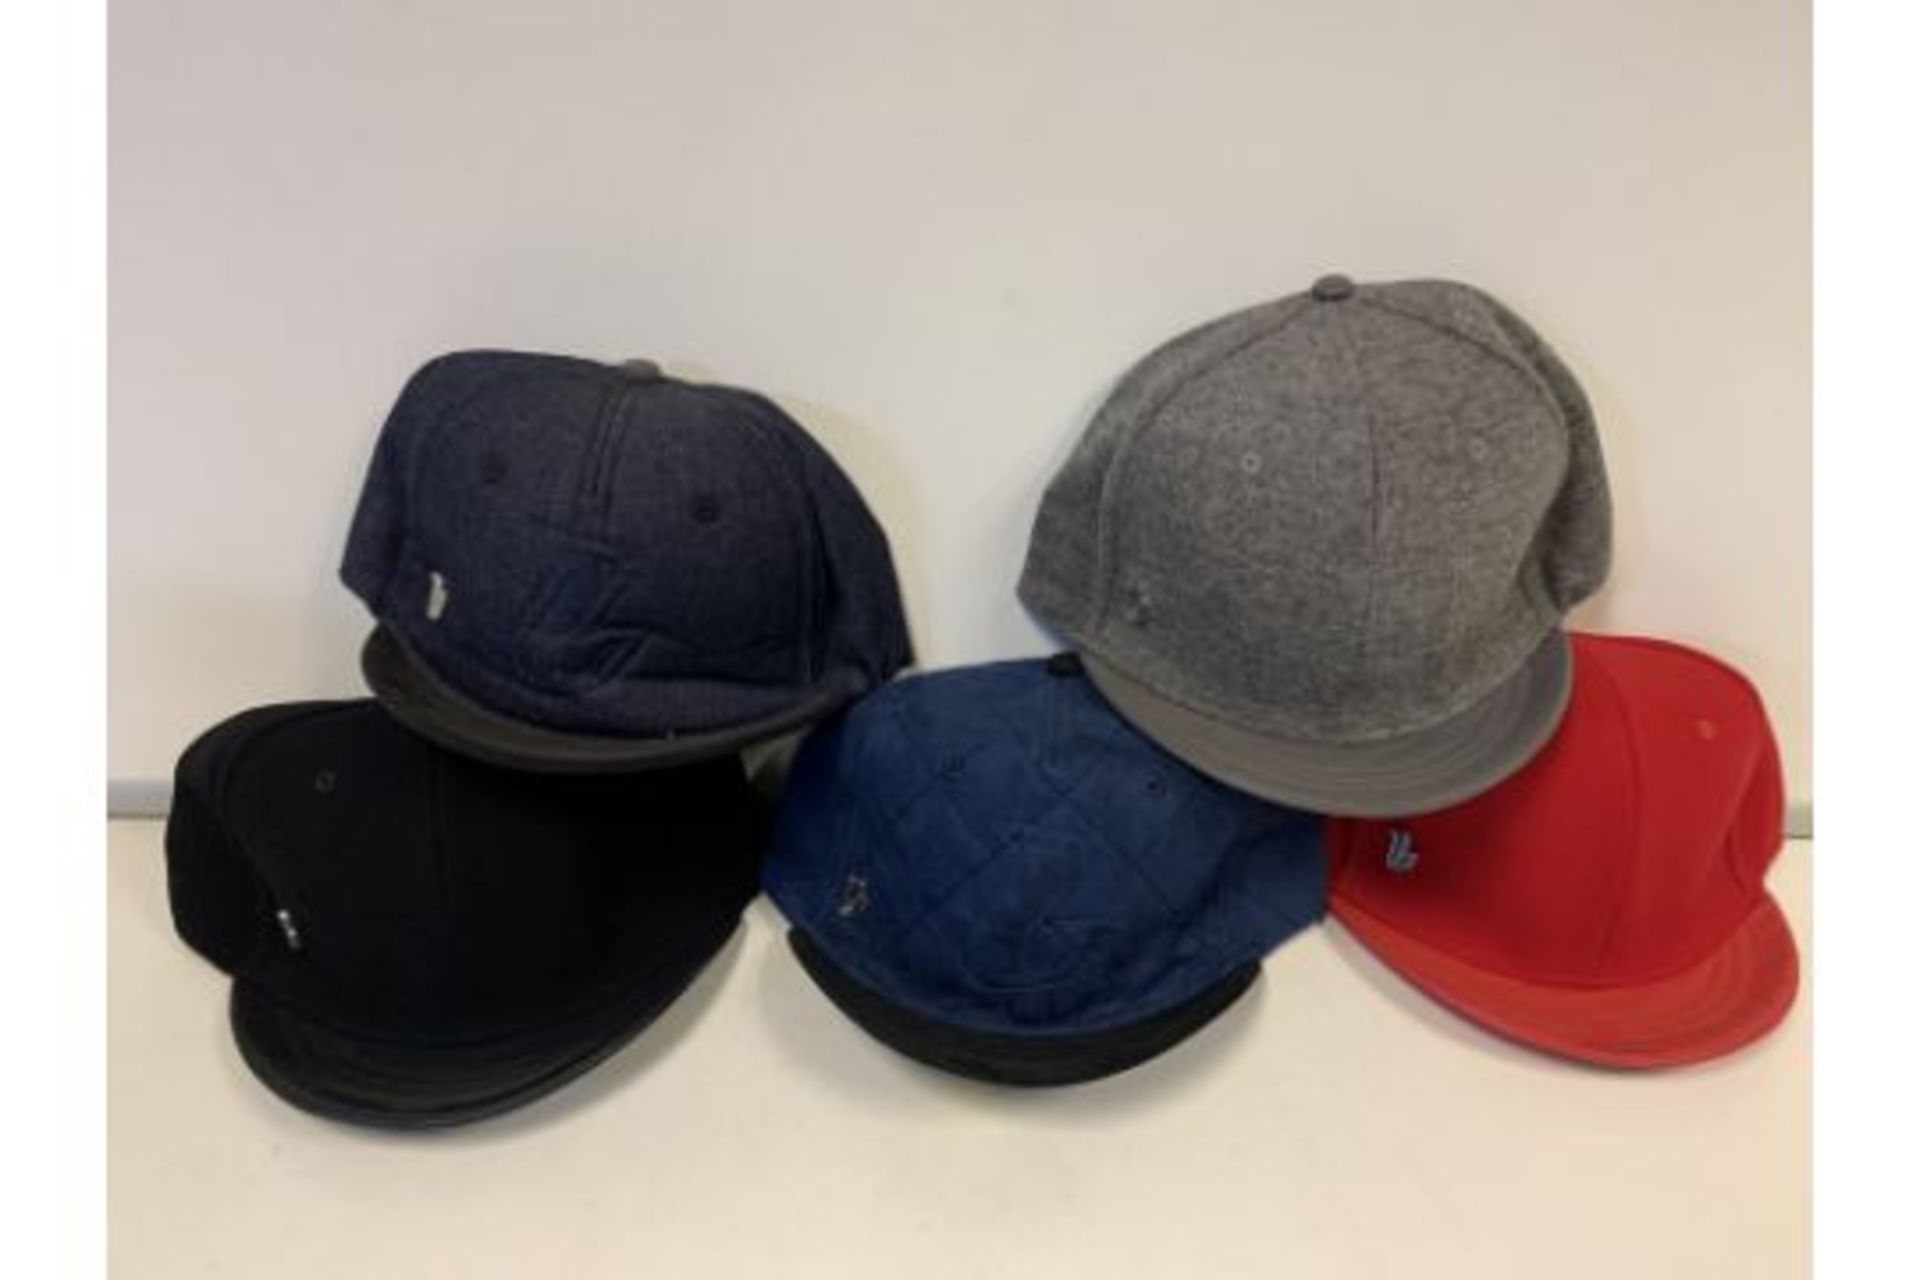 100 X BRAND NEW ASSORTED FASHION CAPS IN VARIOUS STYLES AND SIZES